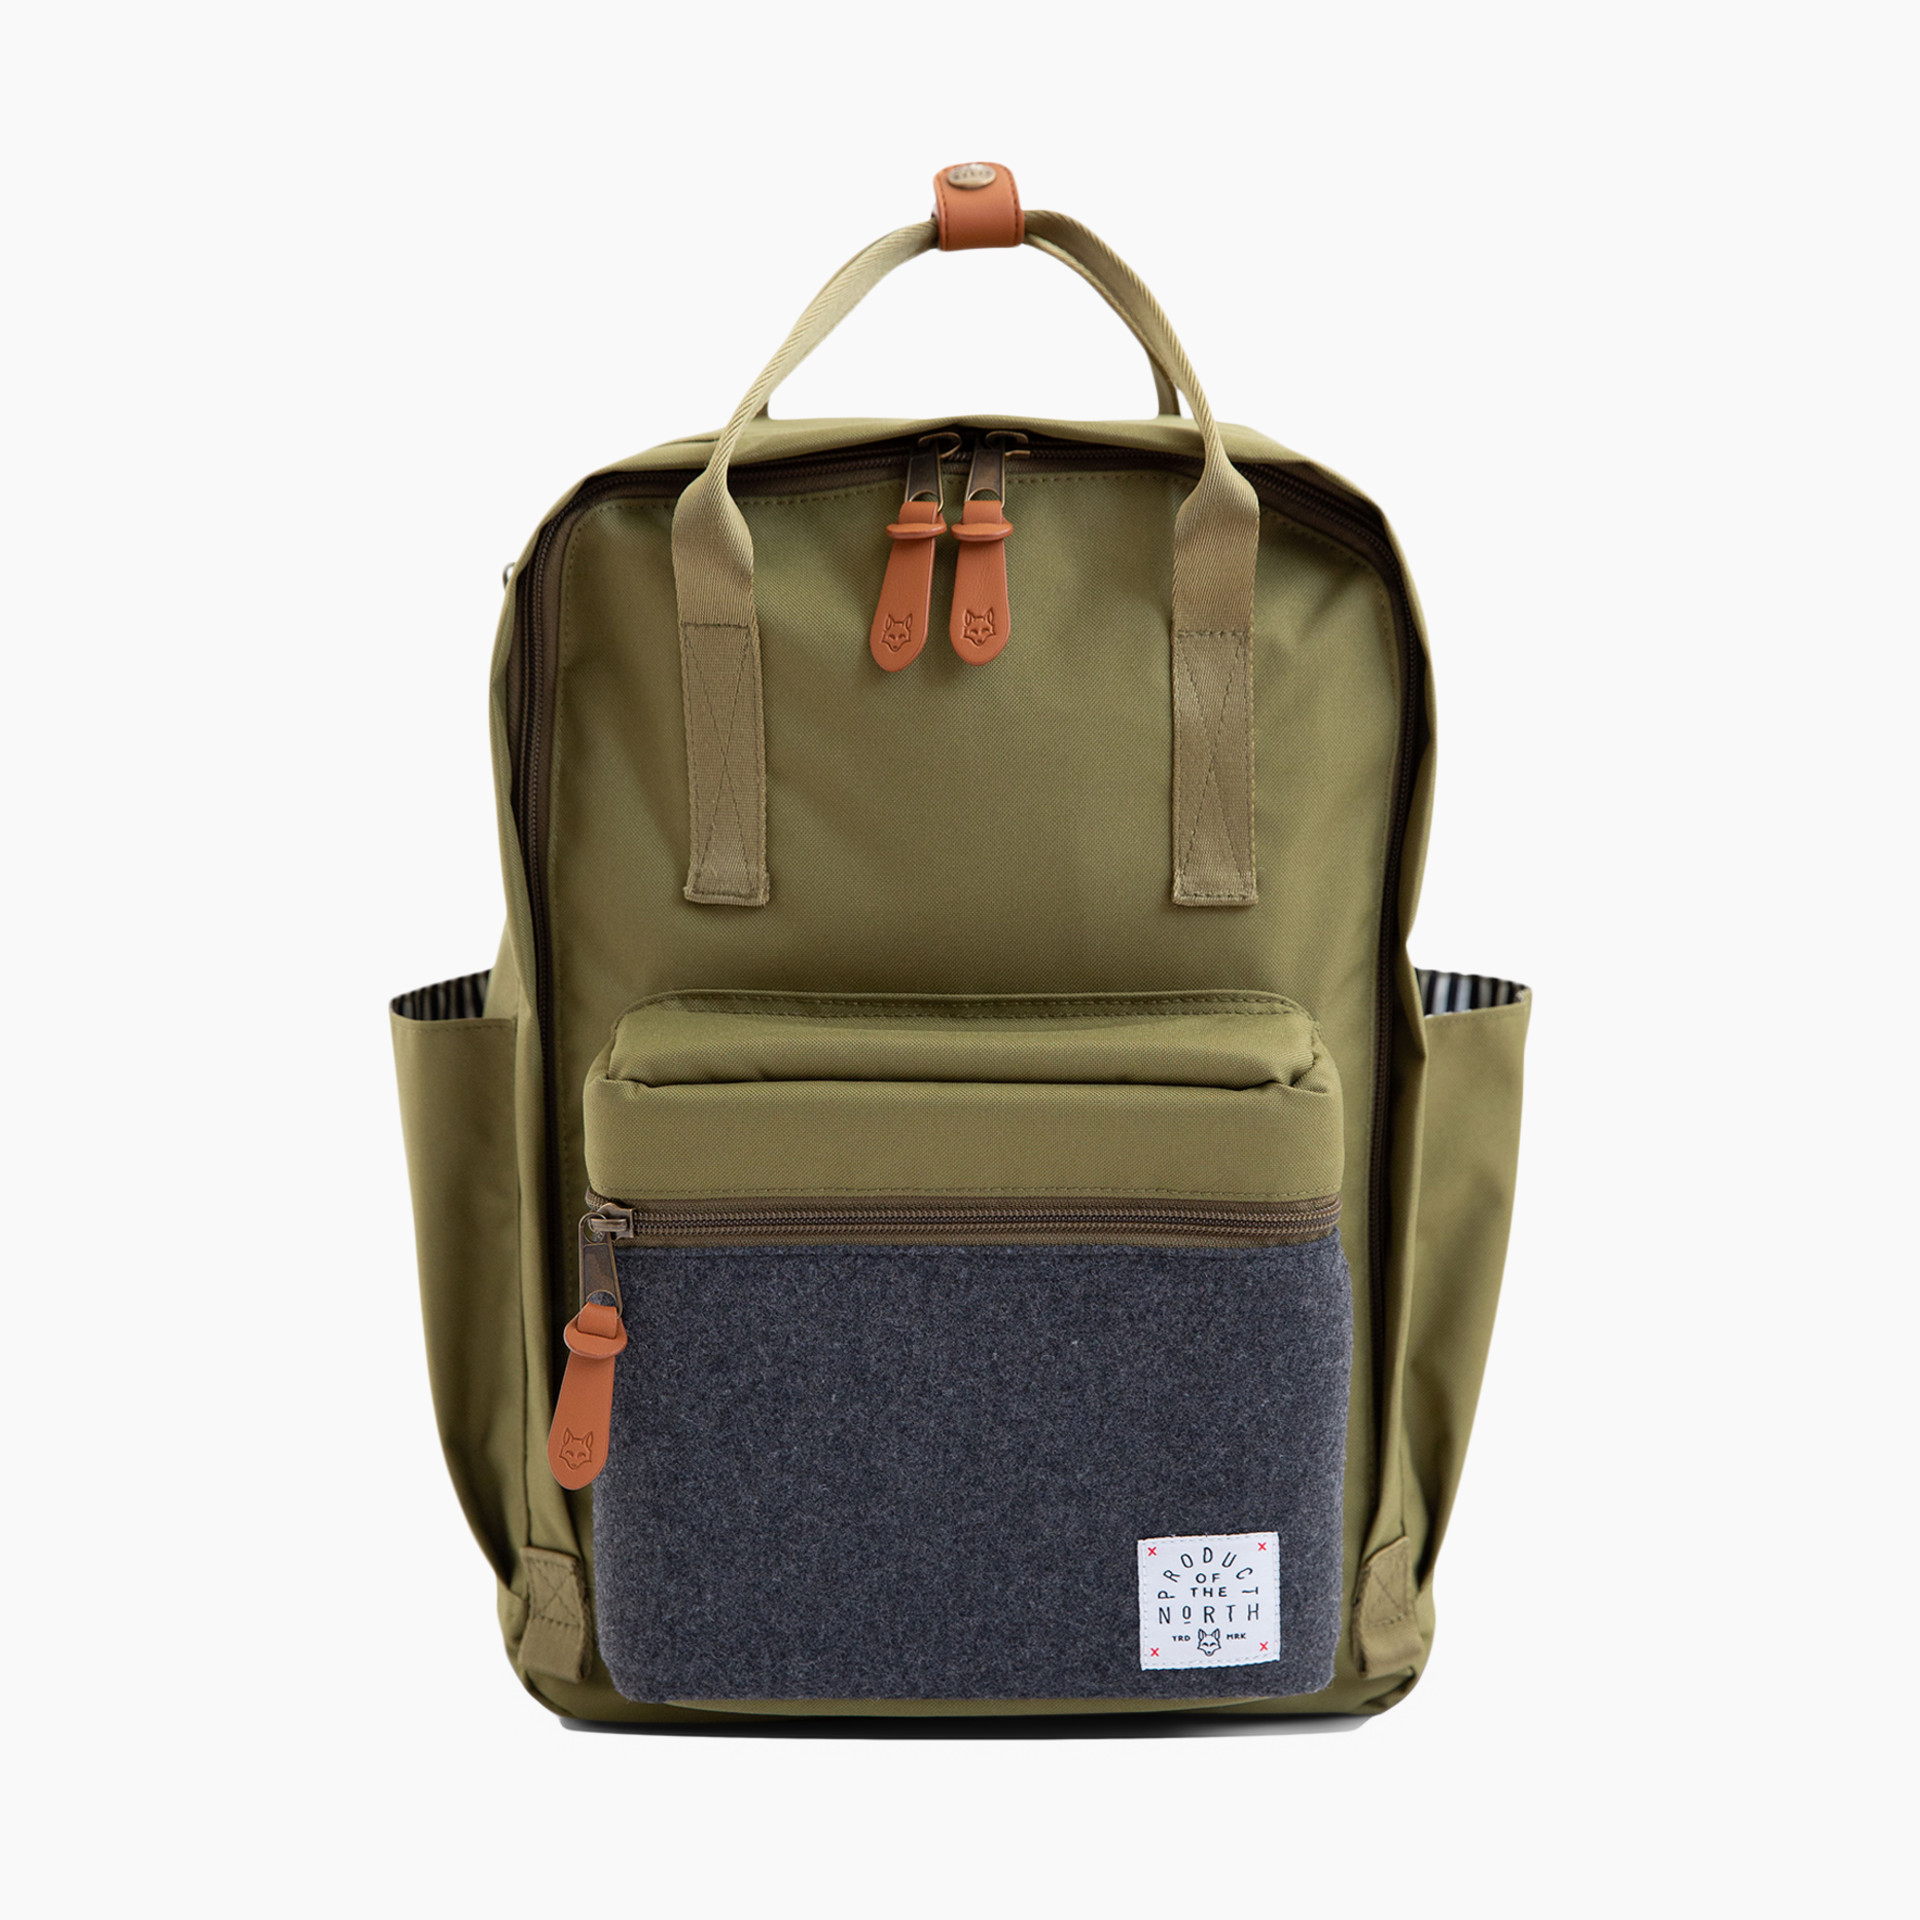 Product of The North Elkin Sustainable Diaper Backpack Heather Grey